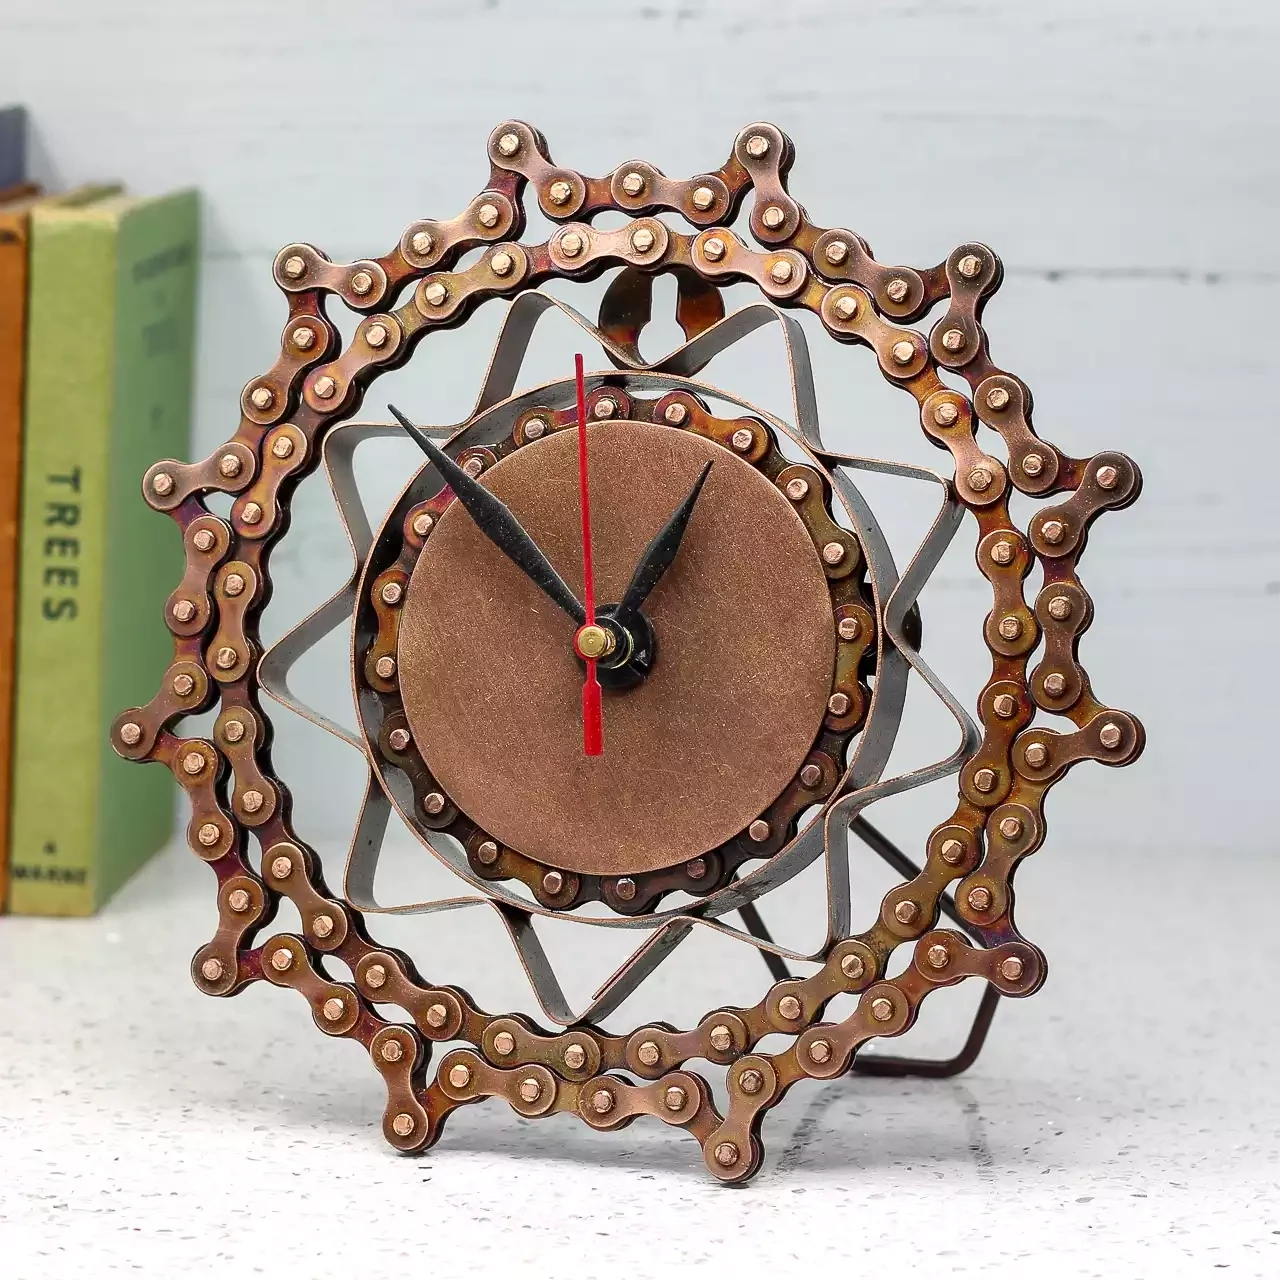 Recycled Bicycle Chain Clock - Large by Shared Earth